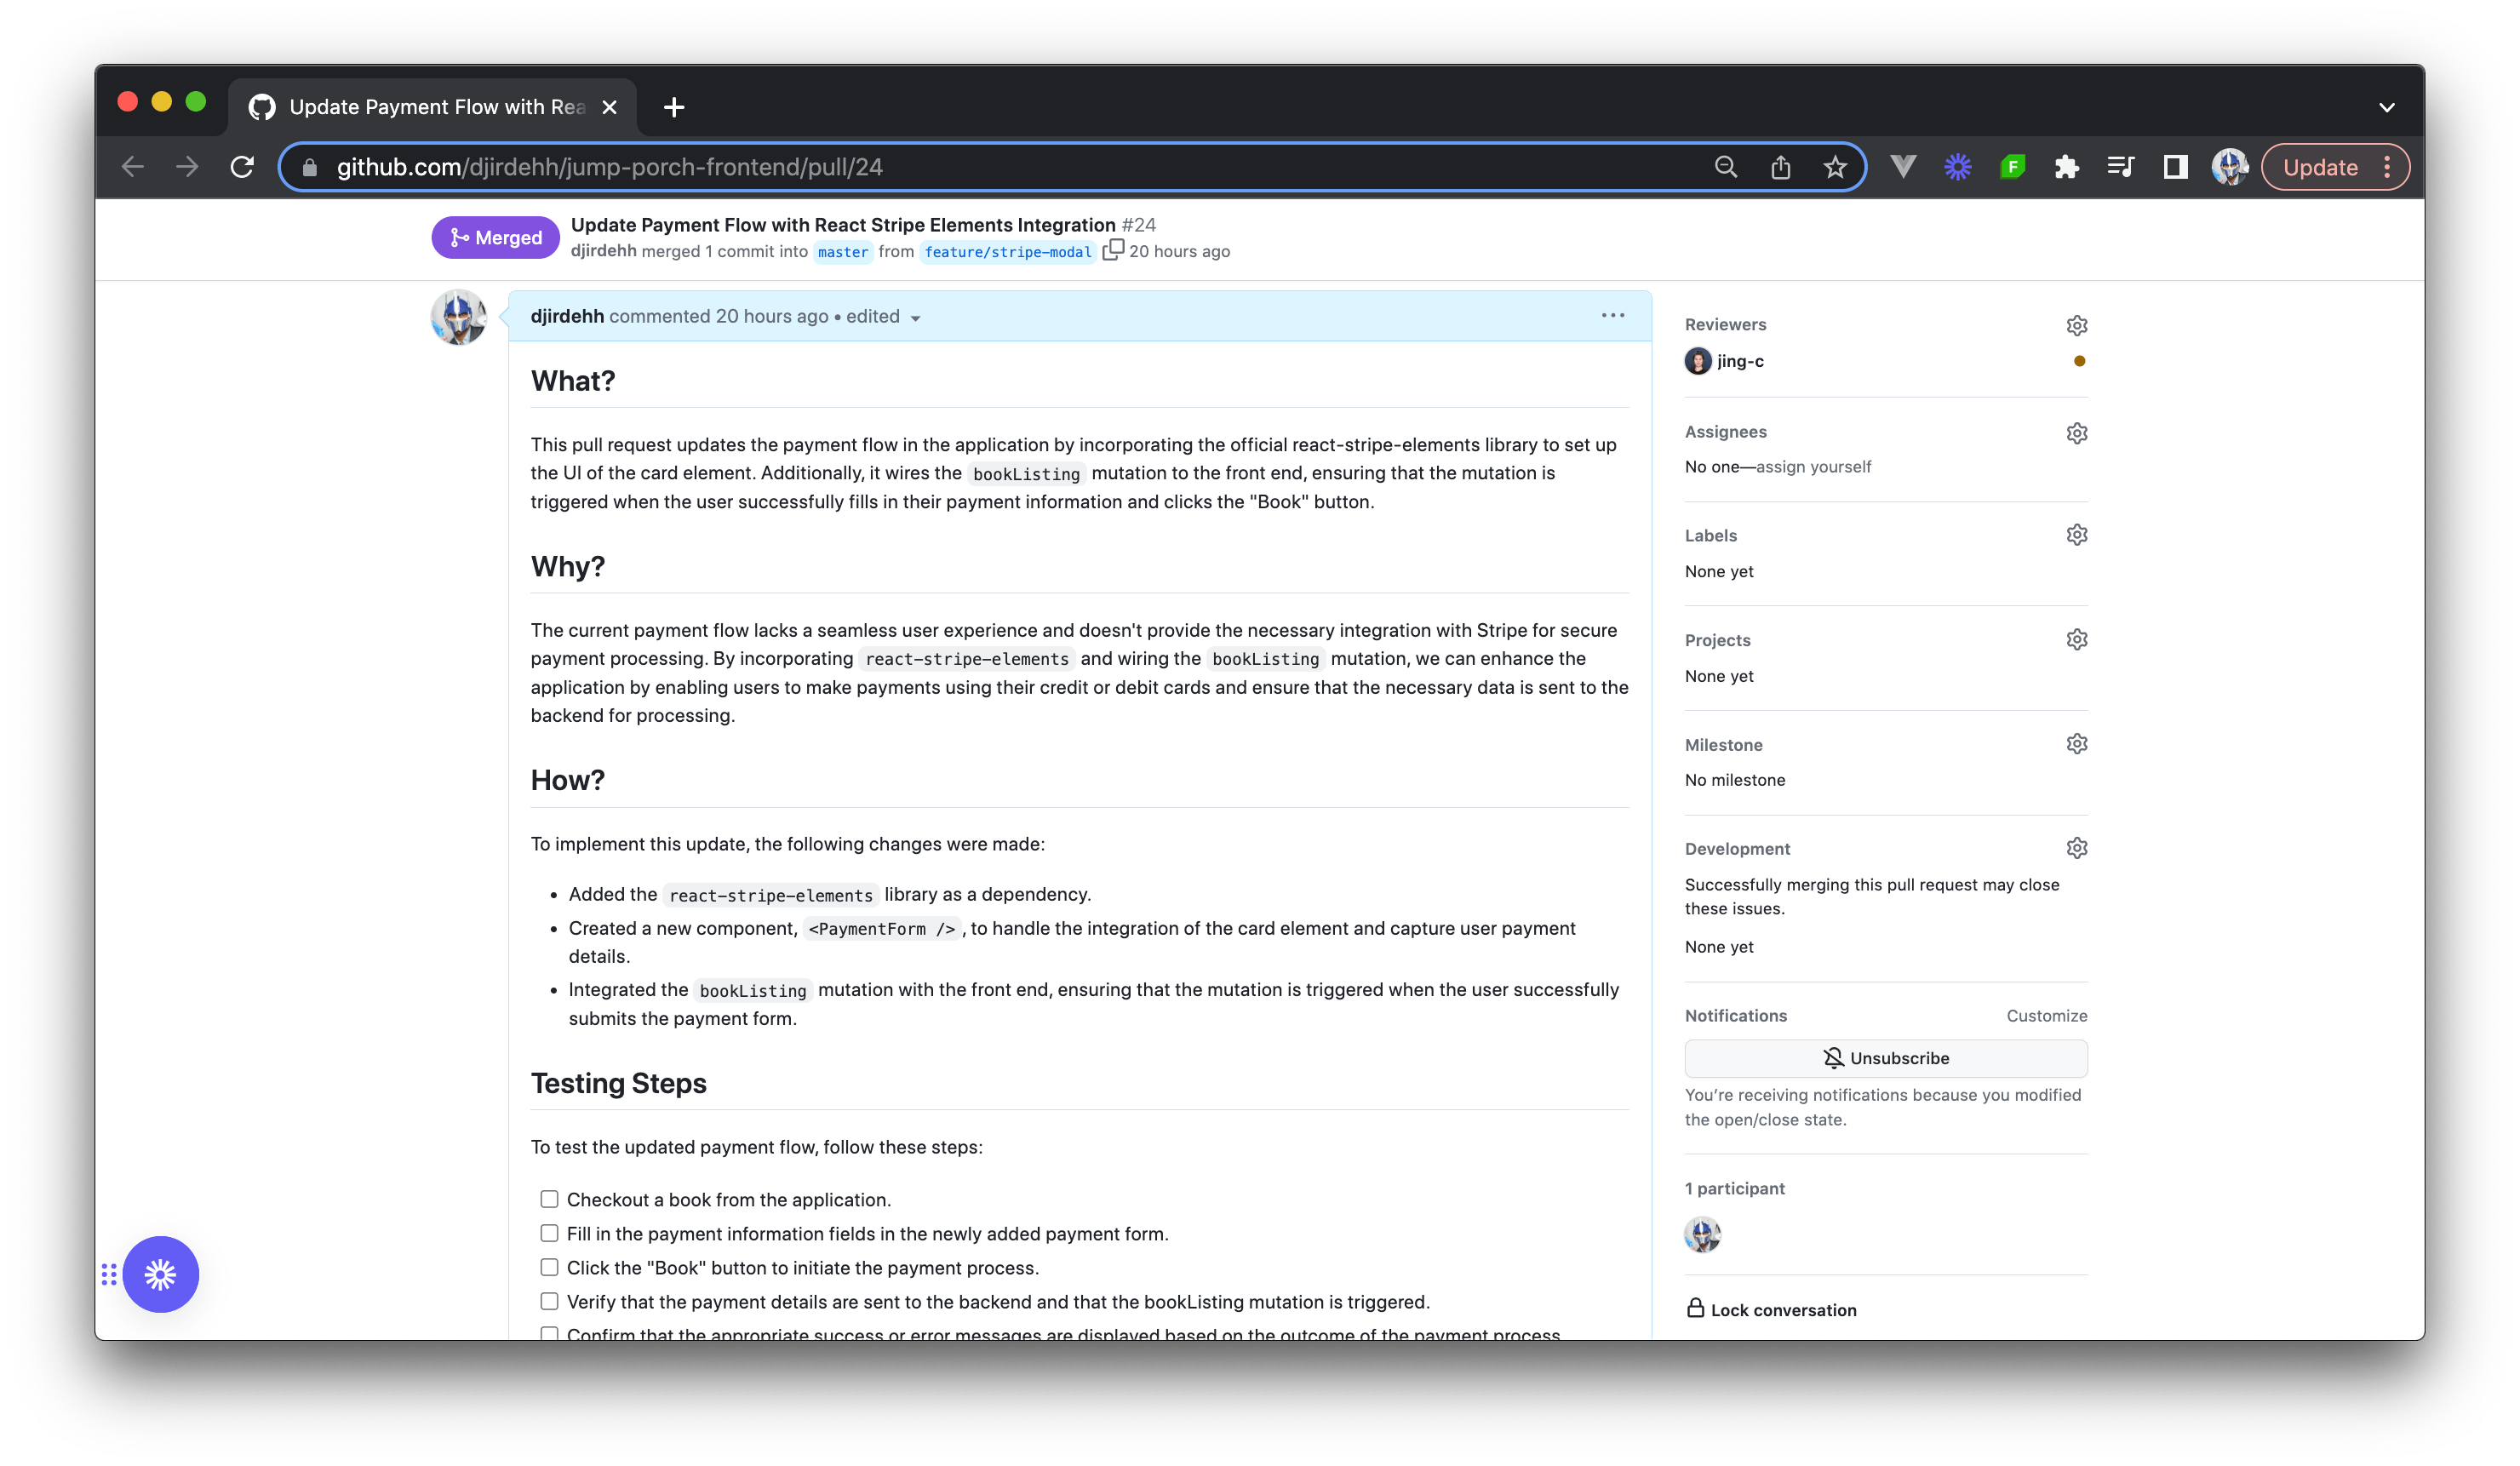 Pull request description screen includes what, why, how, testing steps